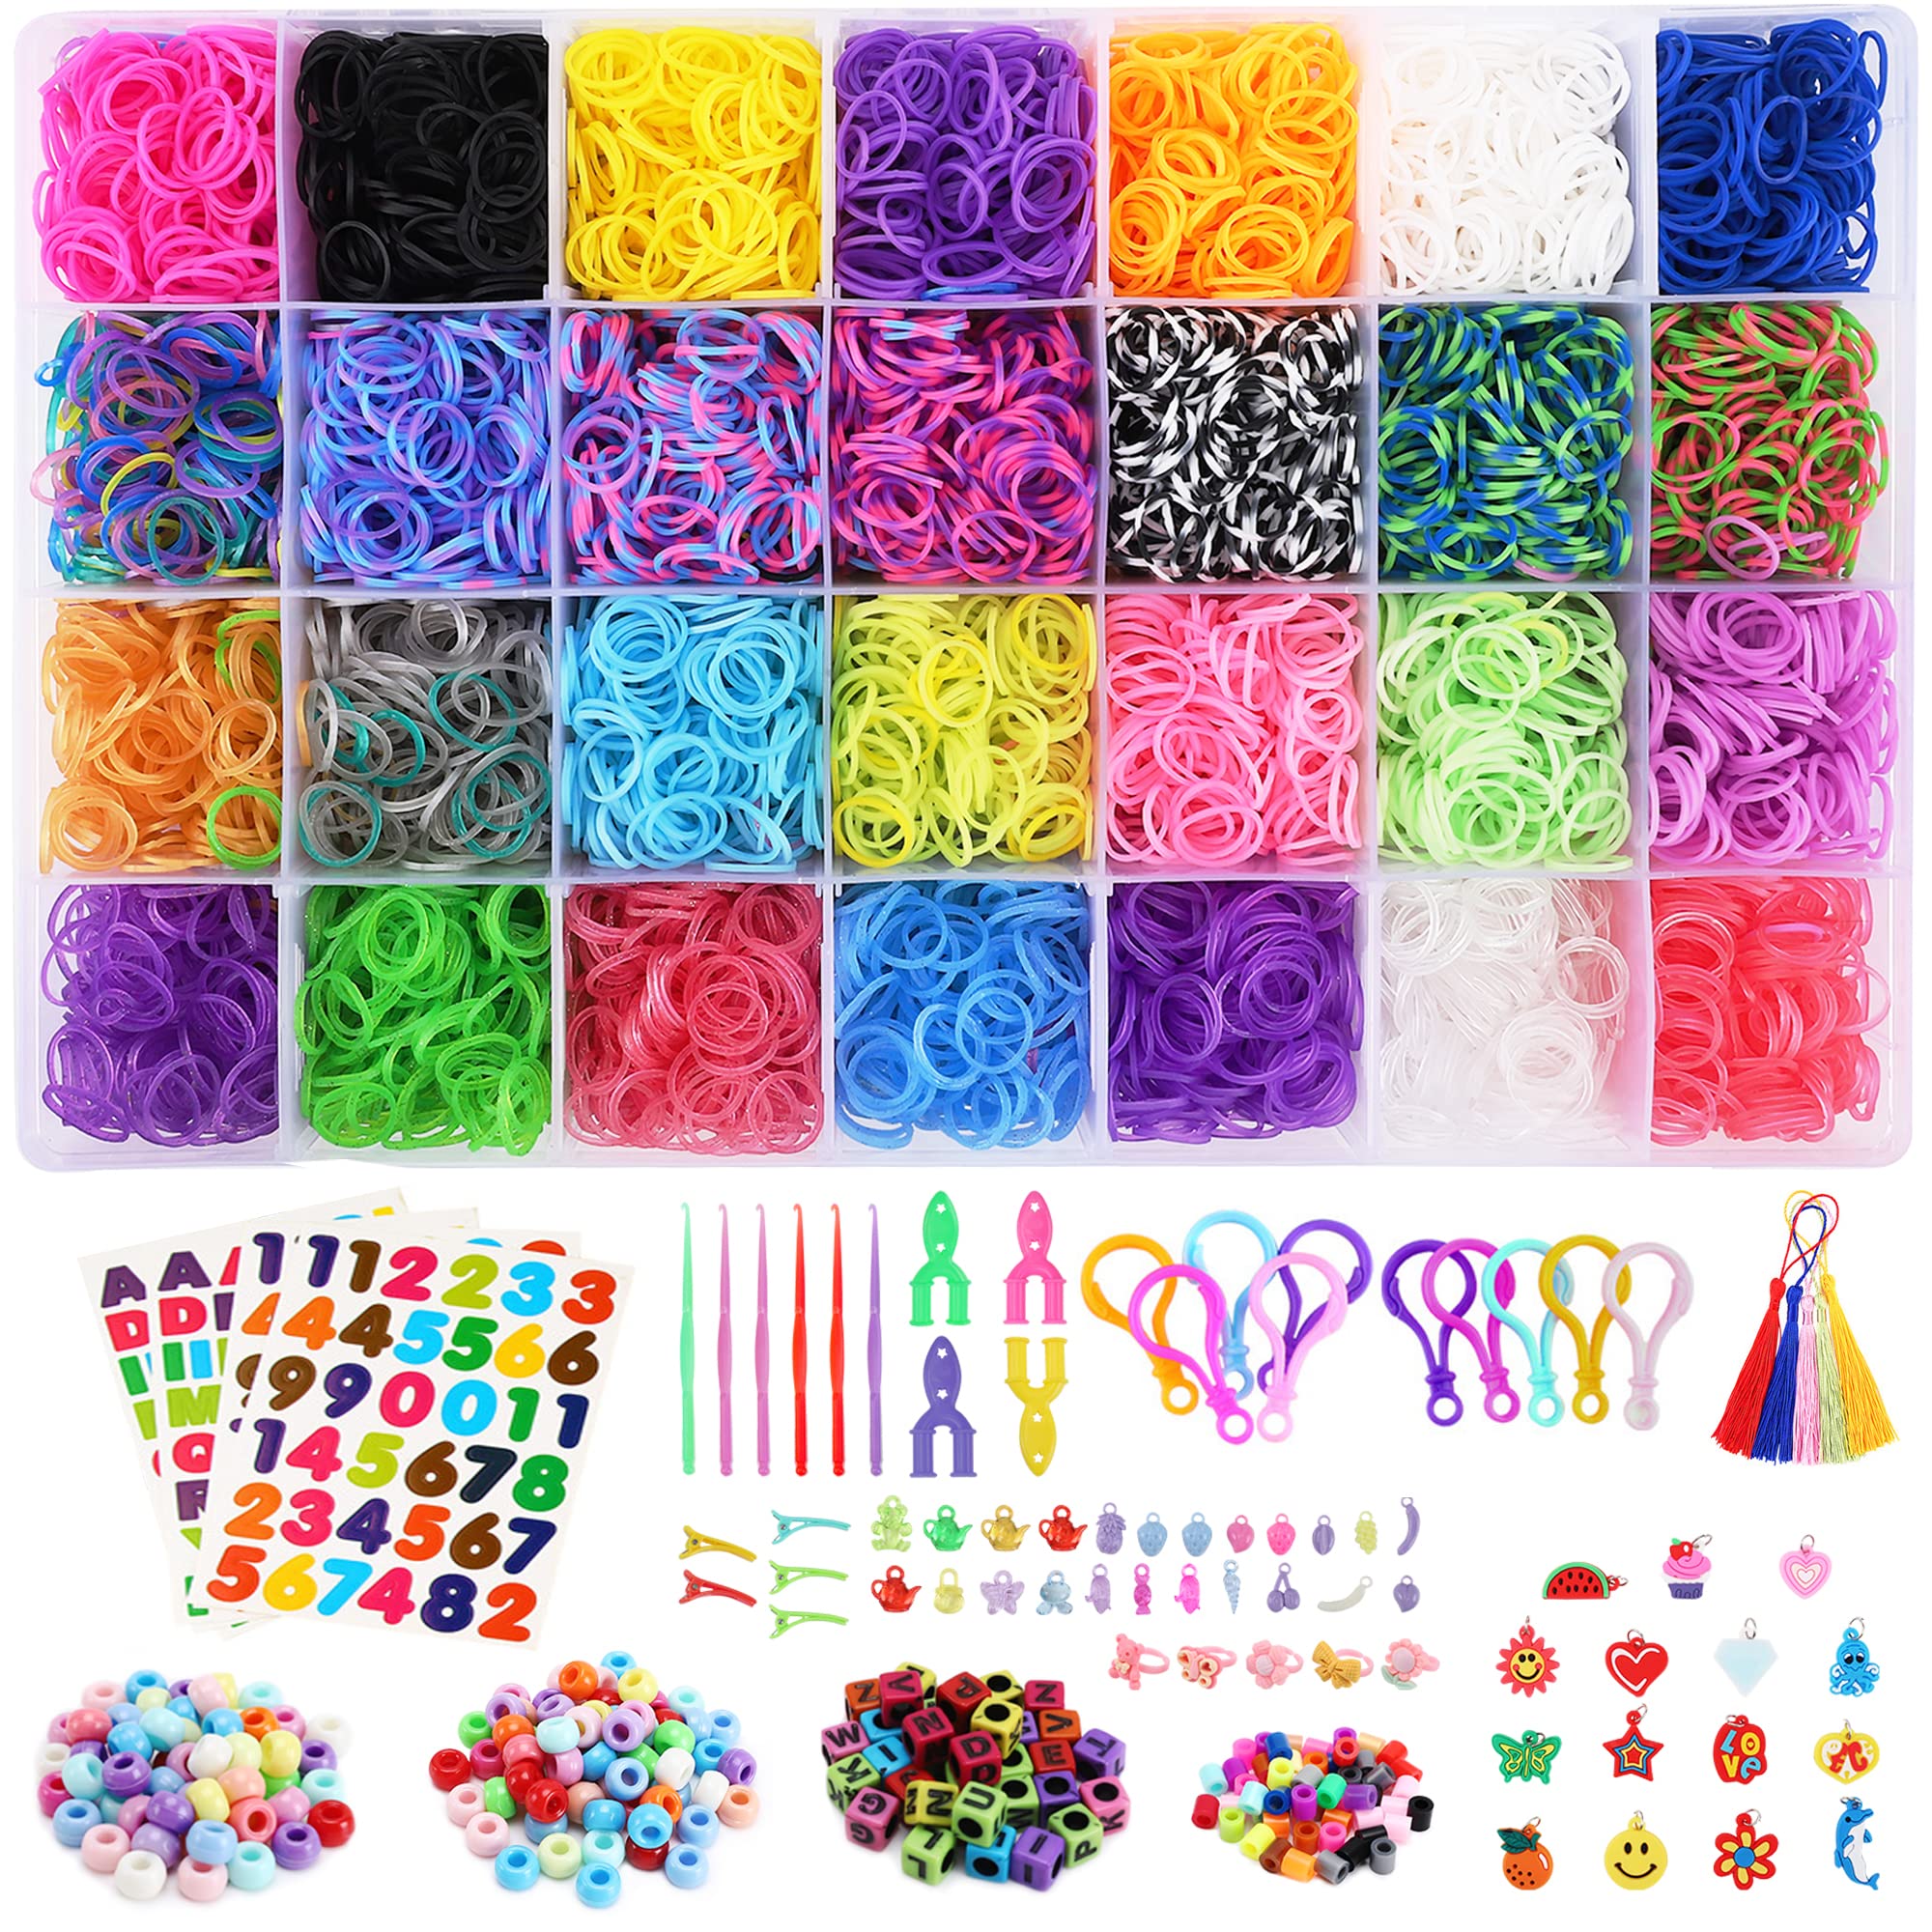 The Beadery Craft Products Wonder Loom Rubber Bands And Clips